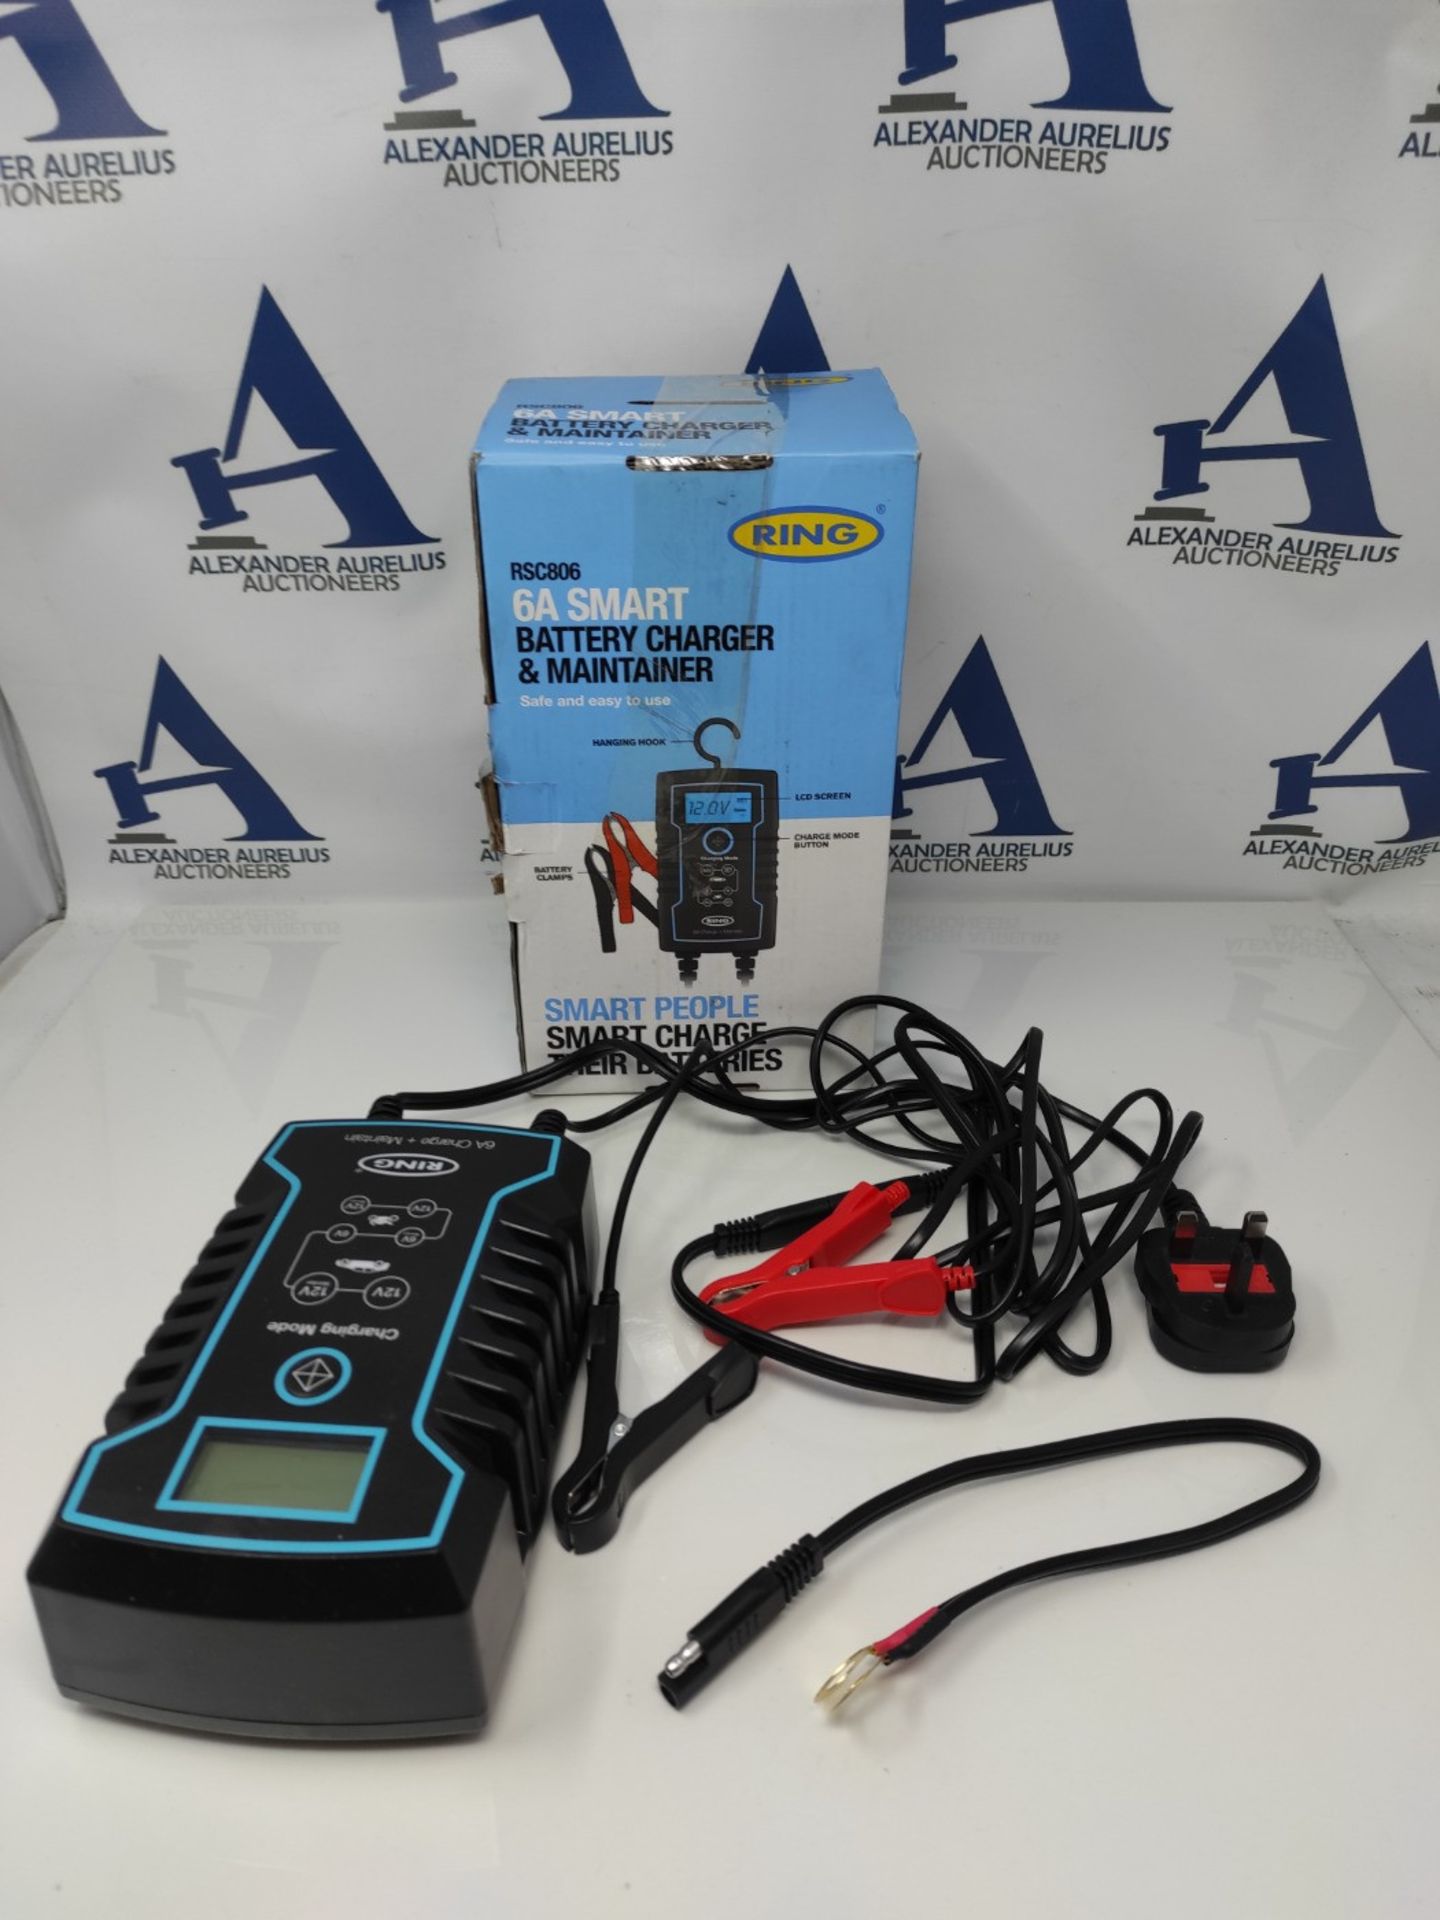 Ring RSC806, 6 Amp Battery Charger and Maintainer. 6V & 12V Smart Charger, Compatible - Image 2 of 2